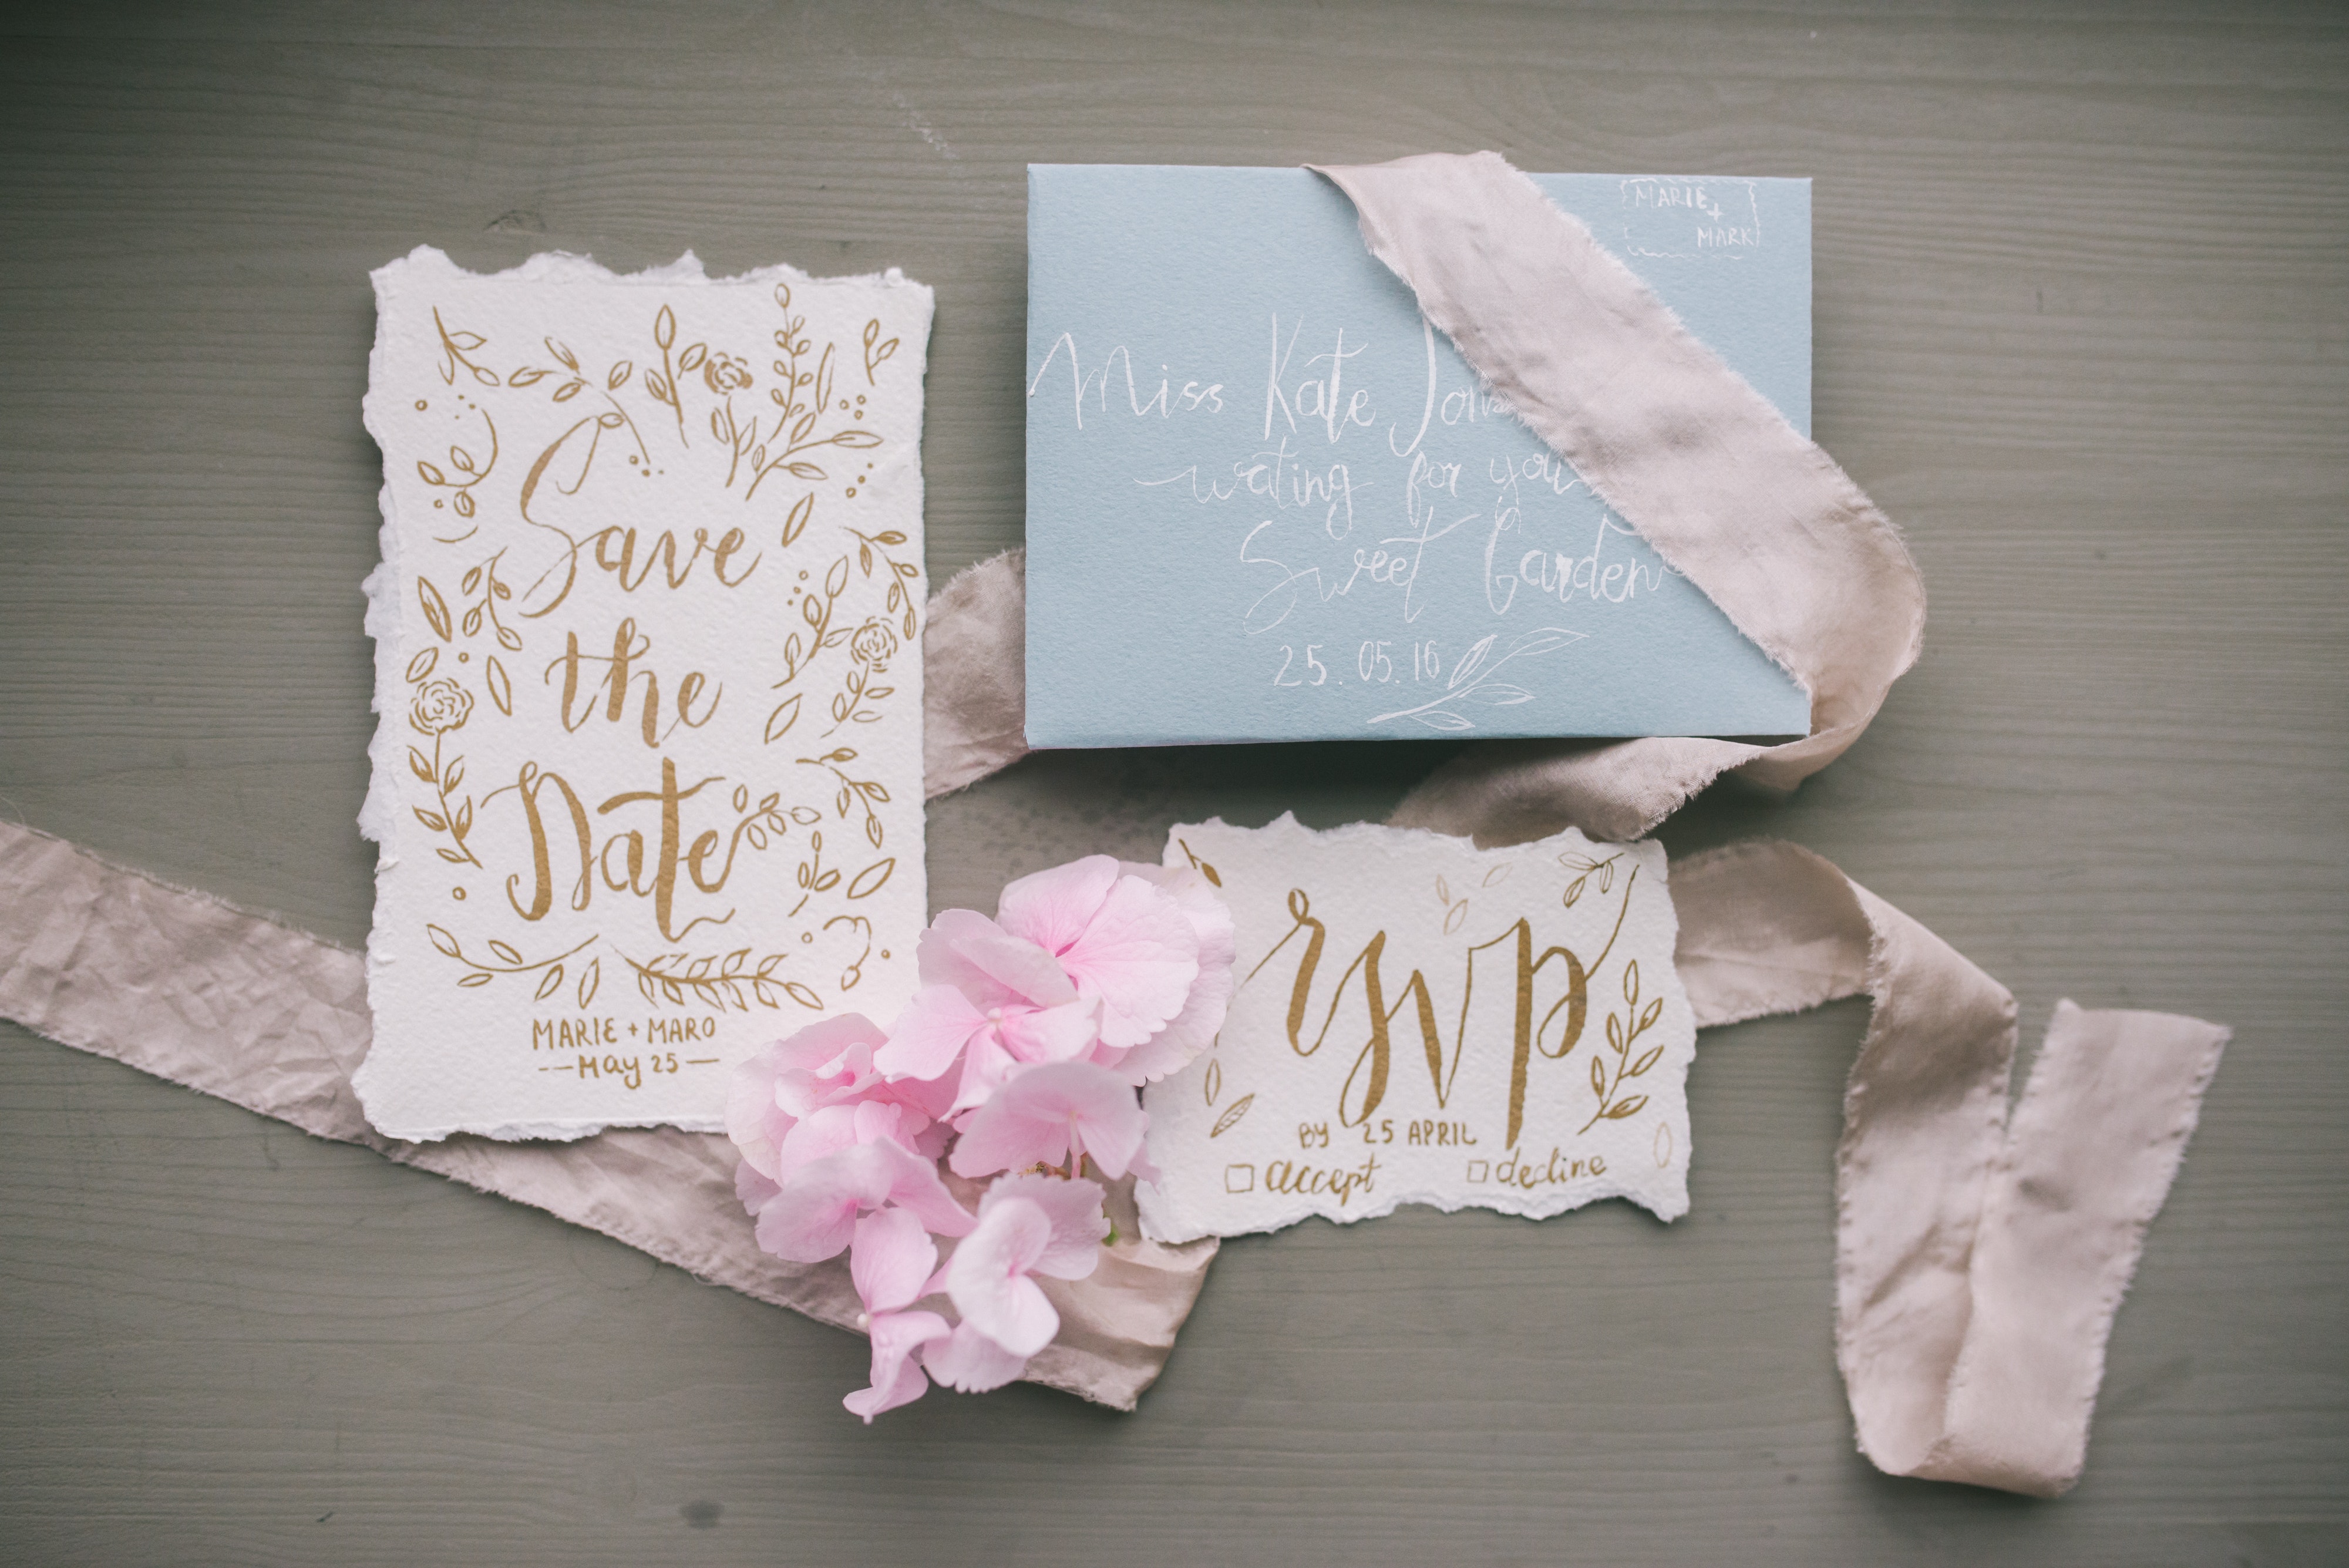 The woman received her sister and ex-boyfriend's wedding invitation. | Source: Pexels